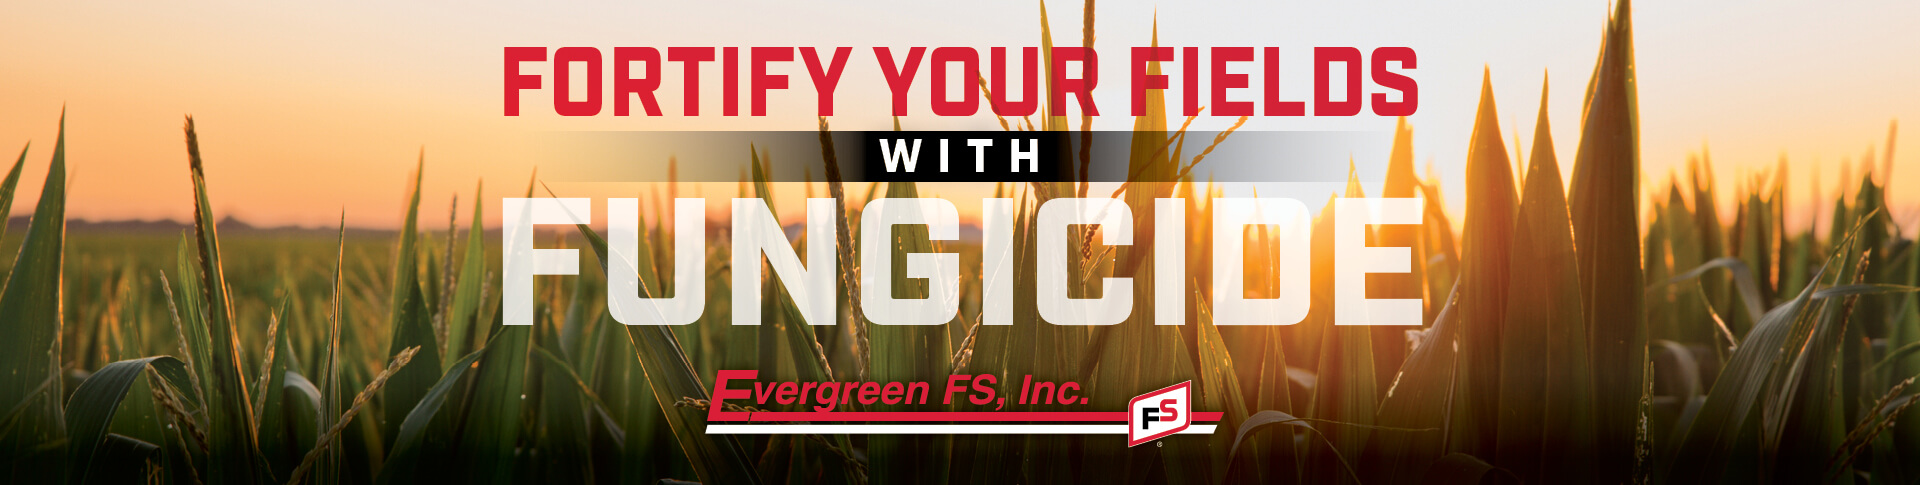 Fortify-Your-Fields-with-Fungicide-Evergreen-FS